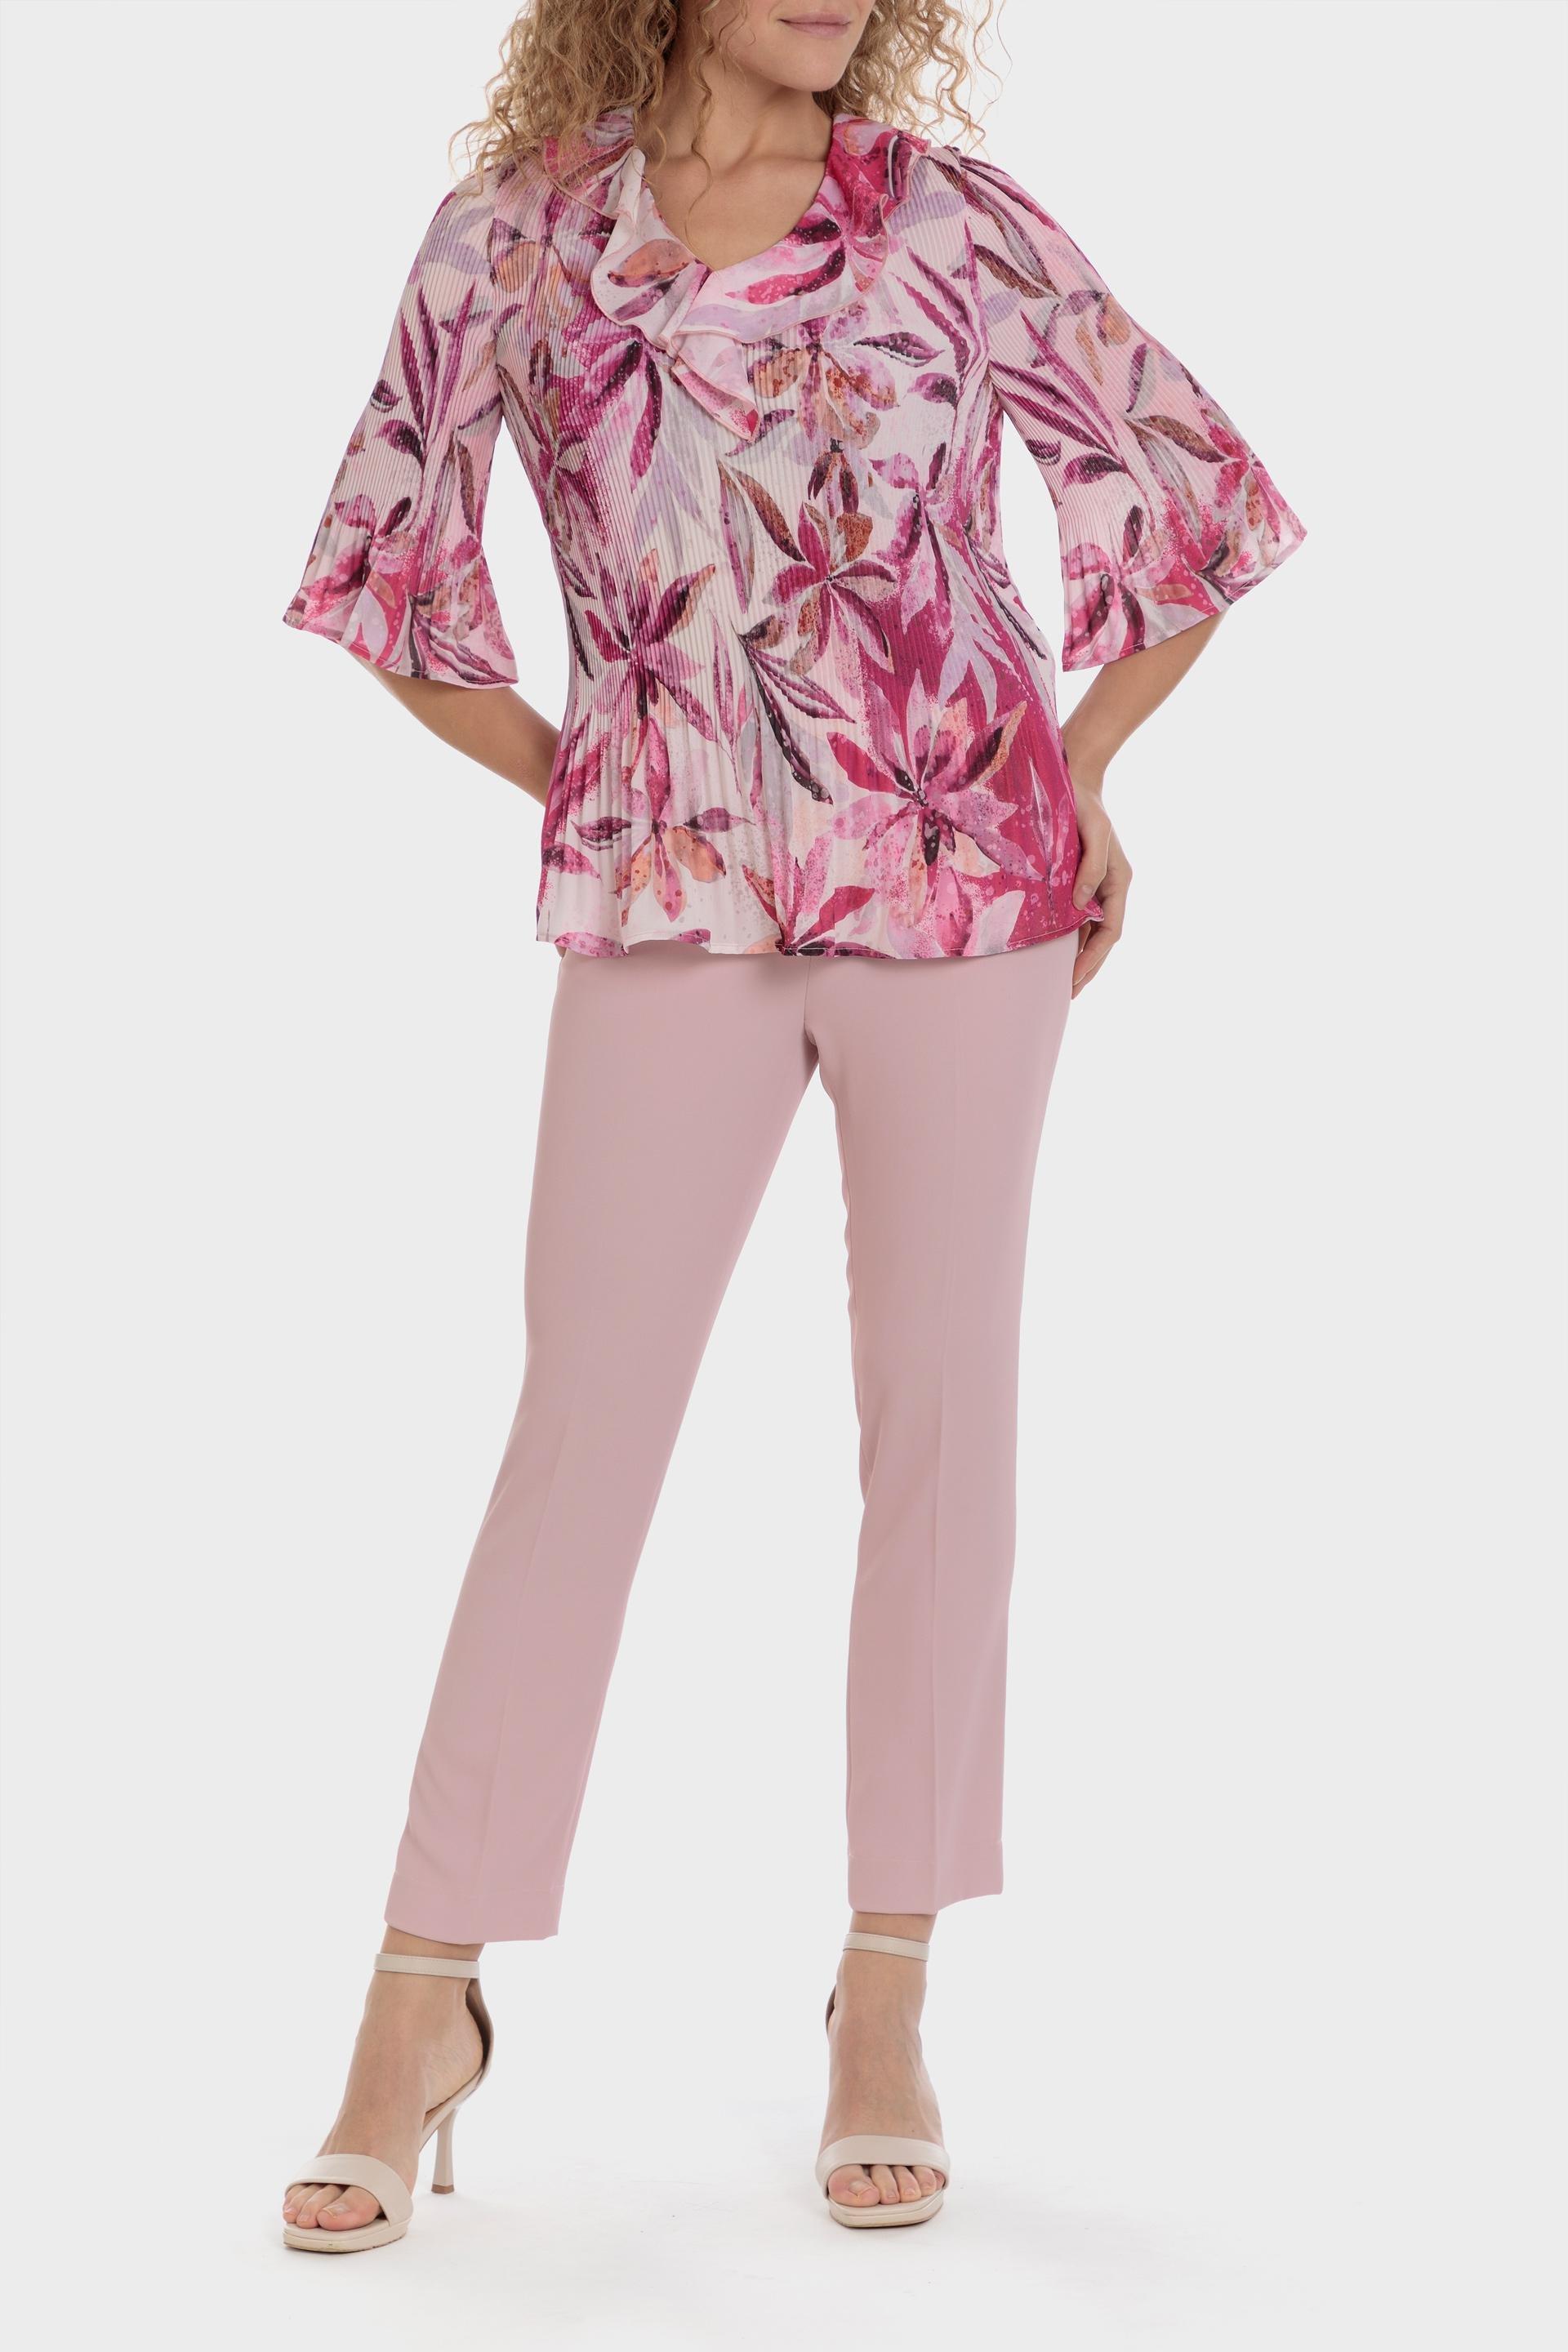 Punt Roma - Pink Floral Pleated Blouse